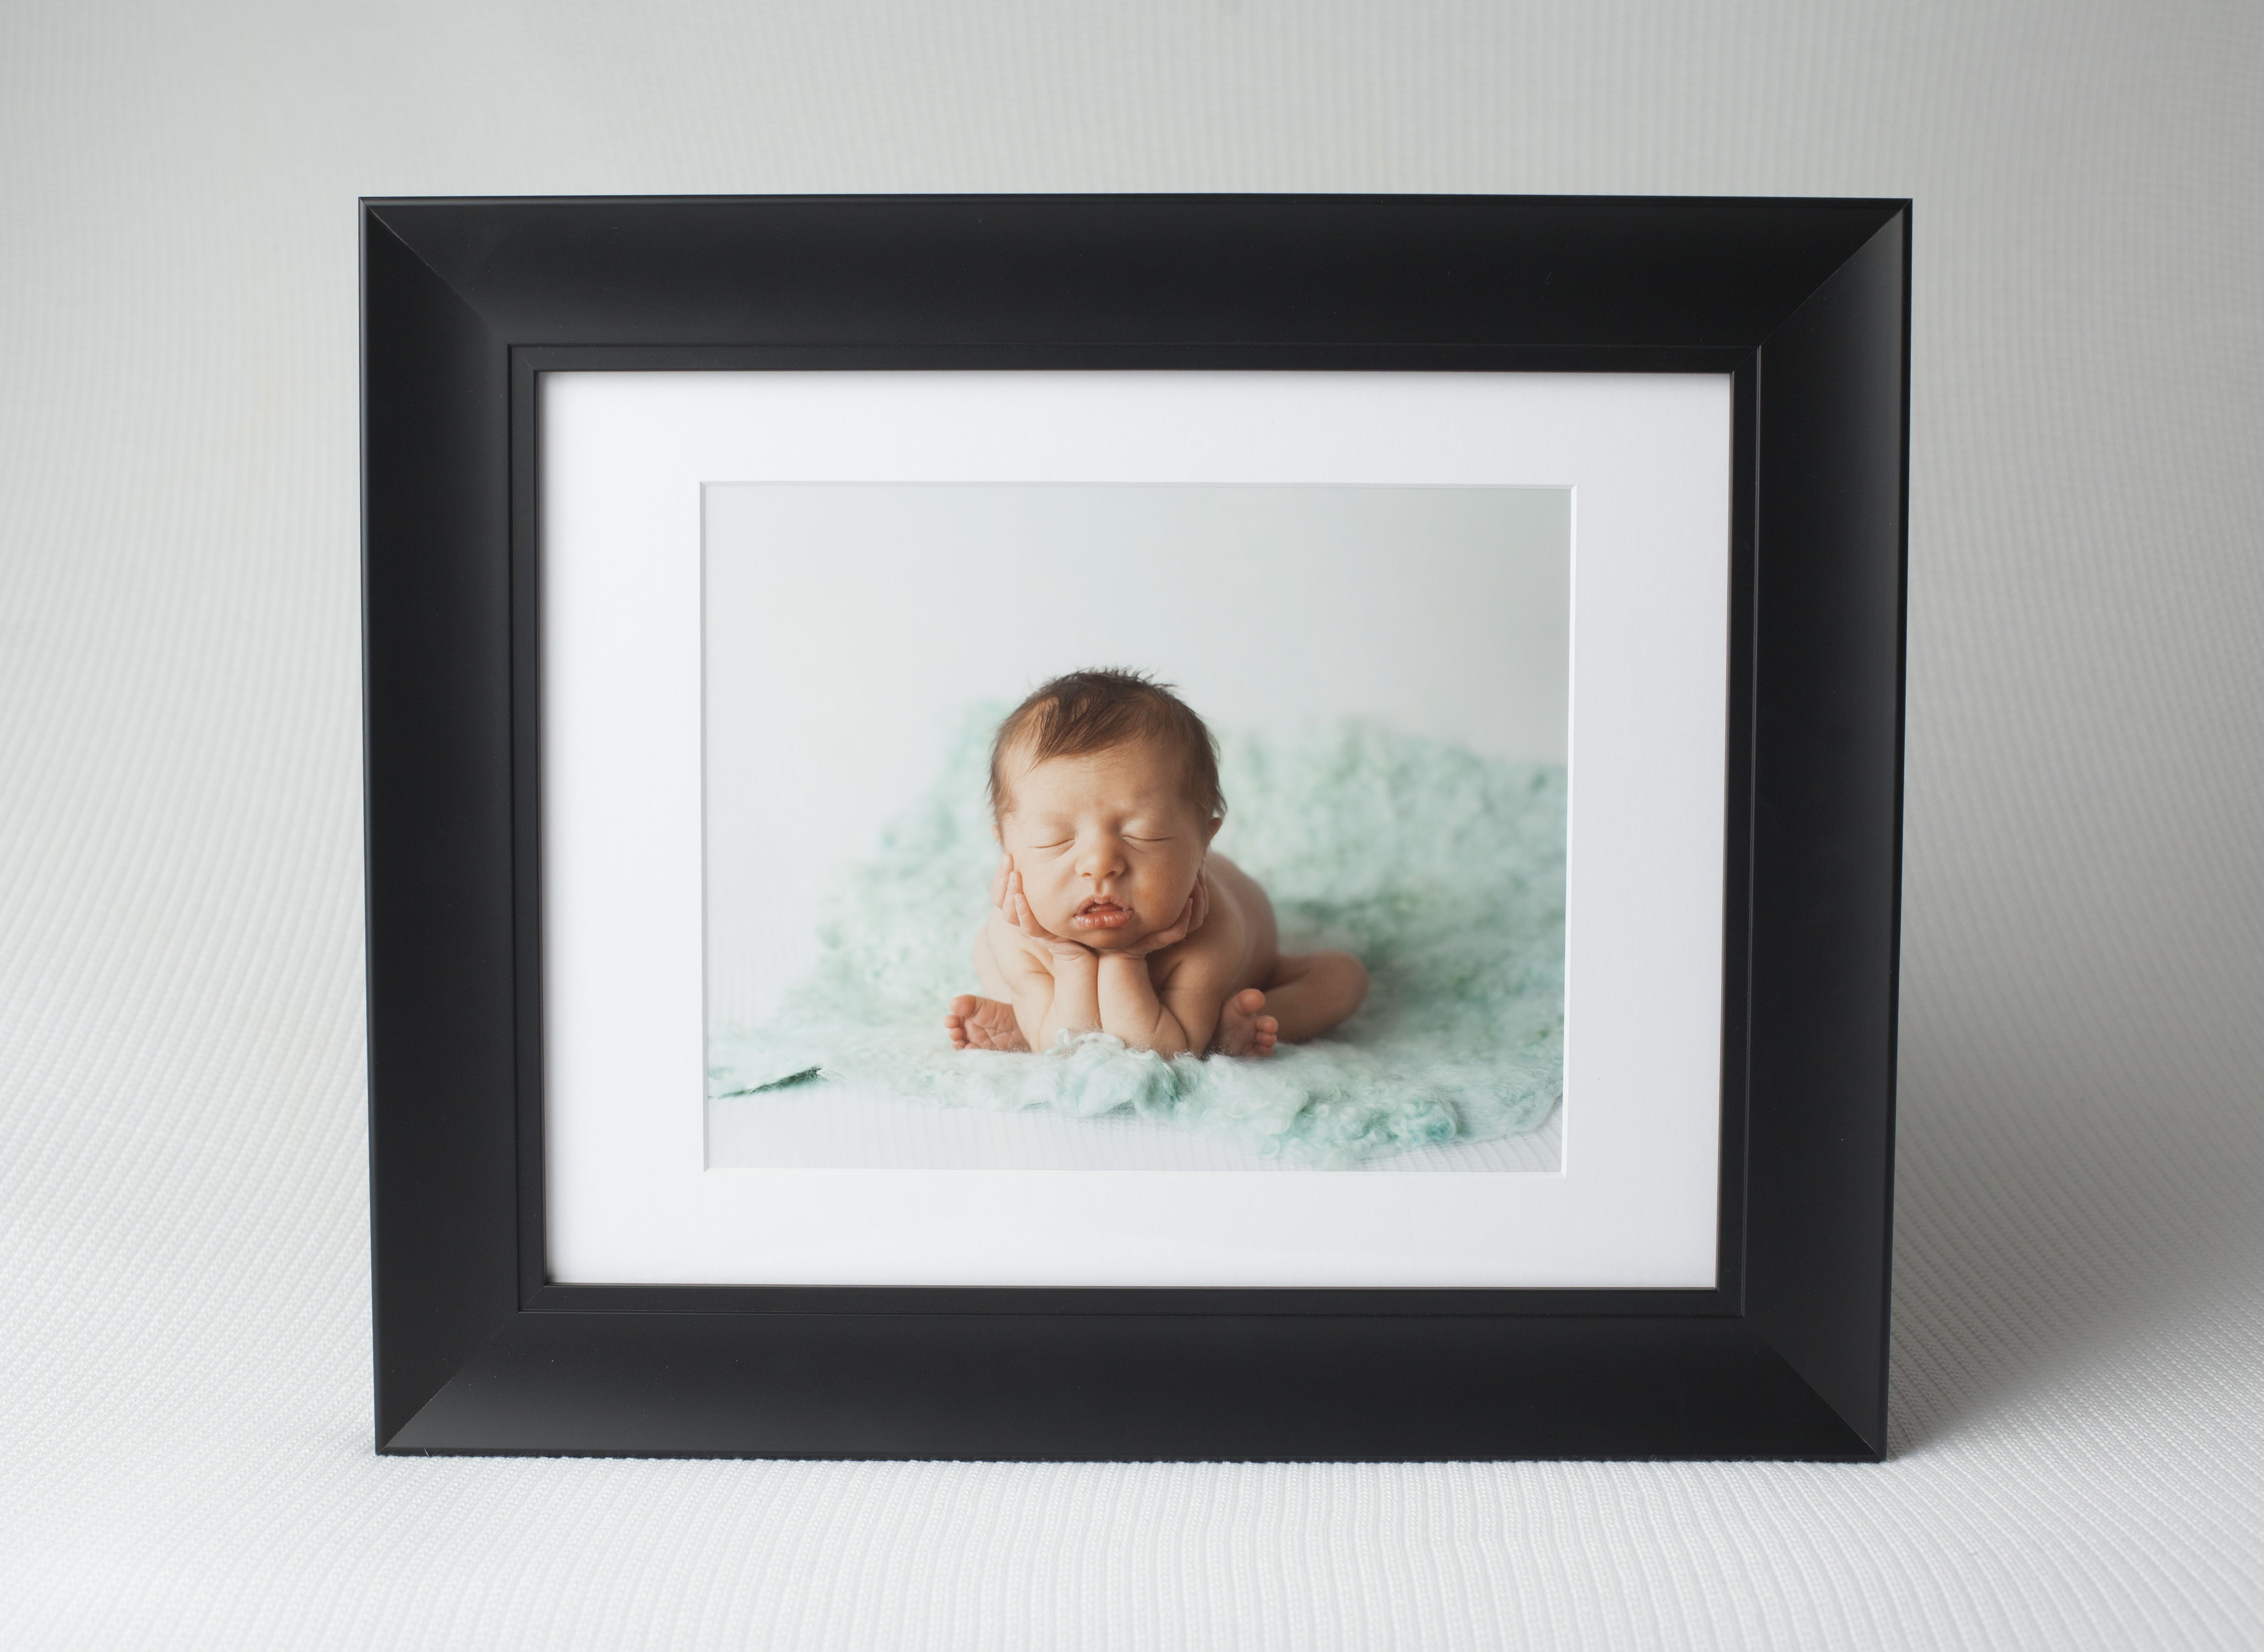 When you book with a professional photographer; you are investing in an experience. The experience ends when you order one-of-a-kind framed portraits that will look amazing in your home for years to come.